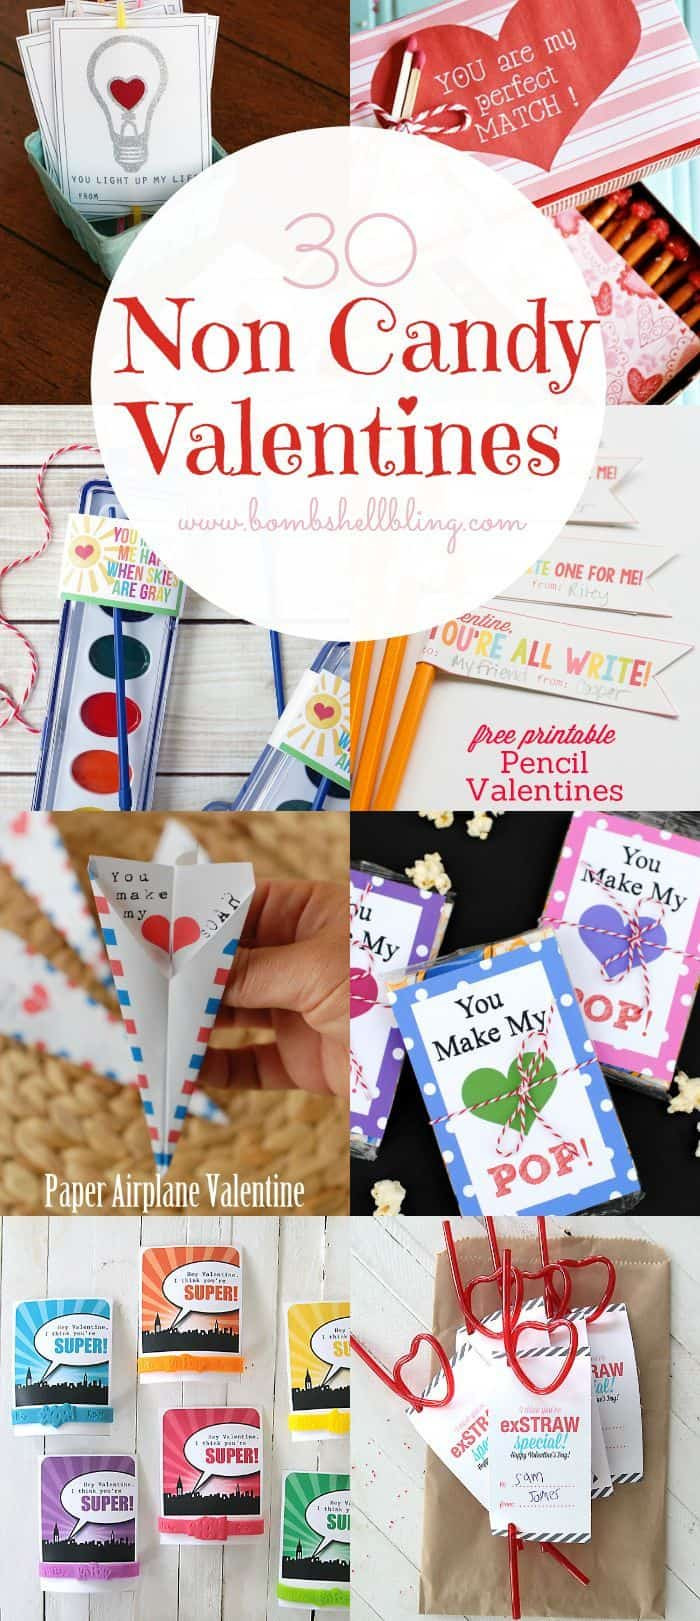 Valentine Sweet Gift Ideas
 10 Non Candy Valentine s Day Gift Ideas for Kids